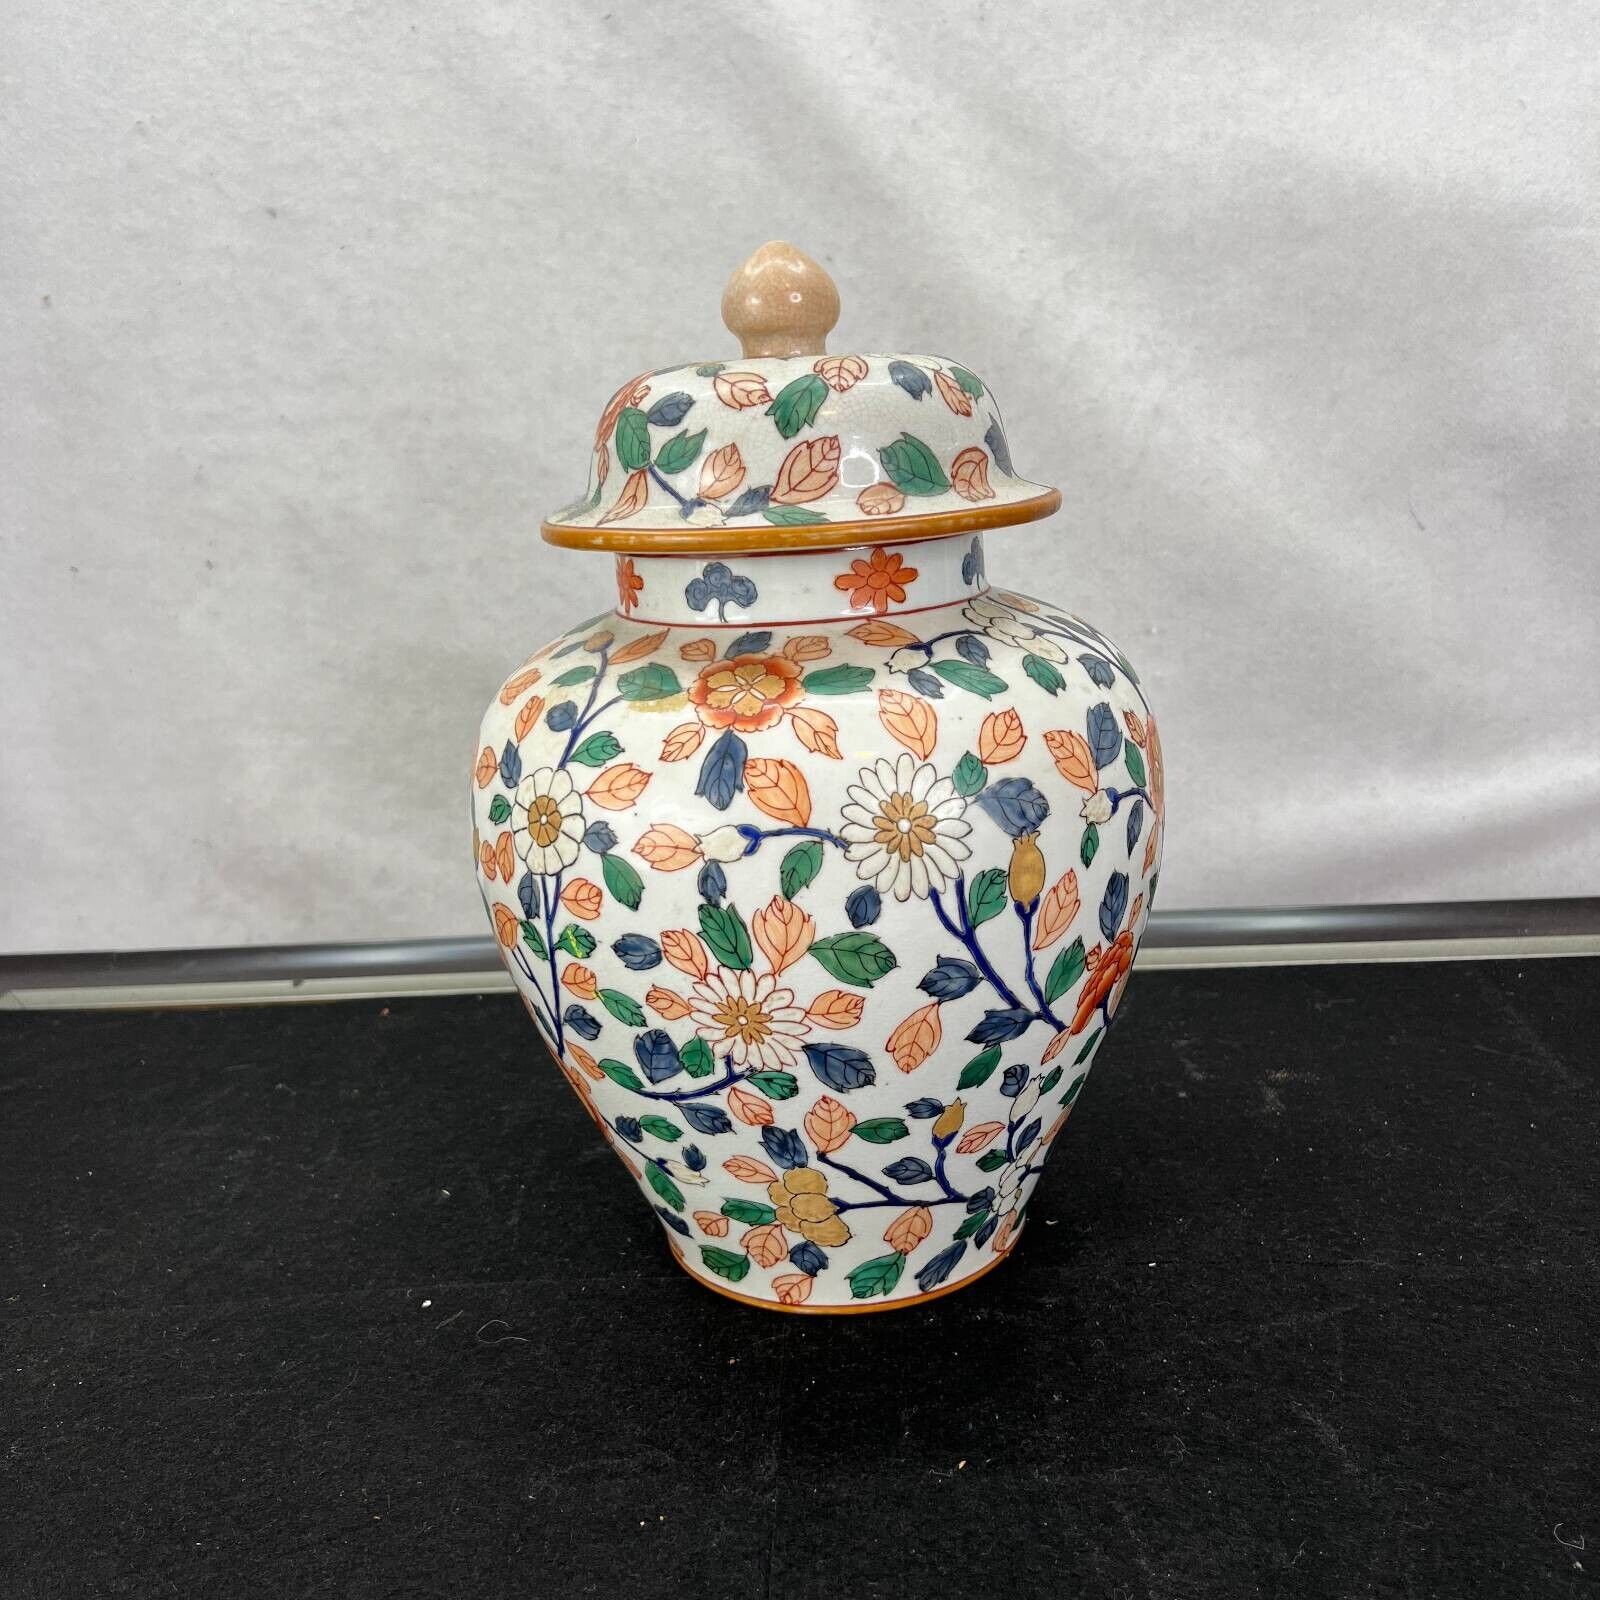 Chinese Ceramic Porcelain Urn Jar with Lid Orange White Floral Asian 13.5 in